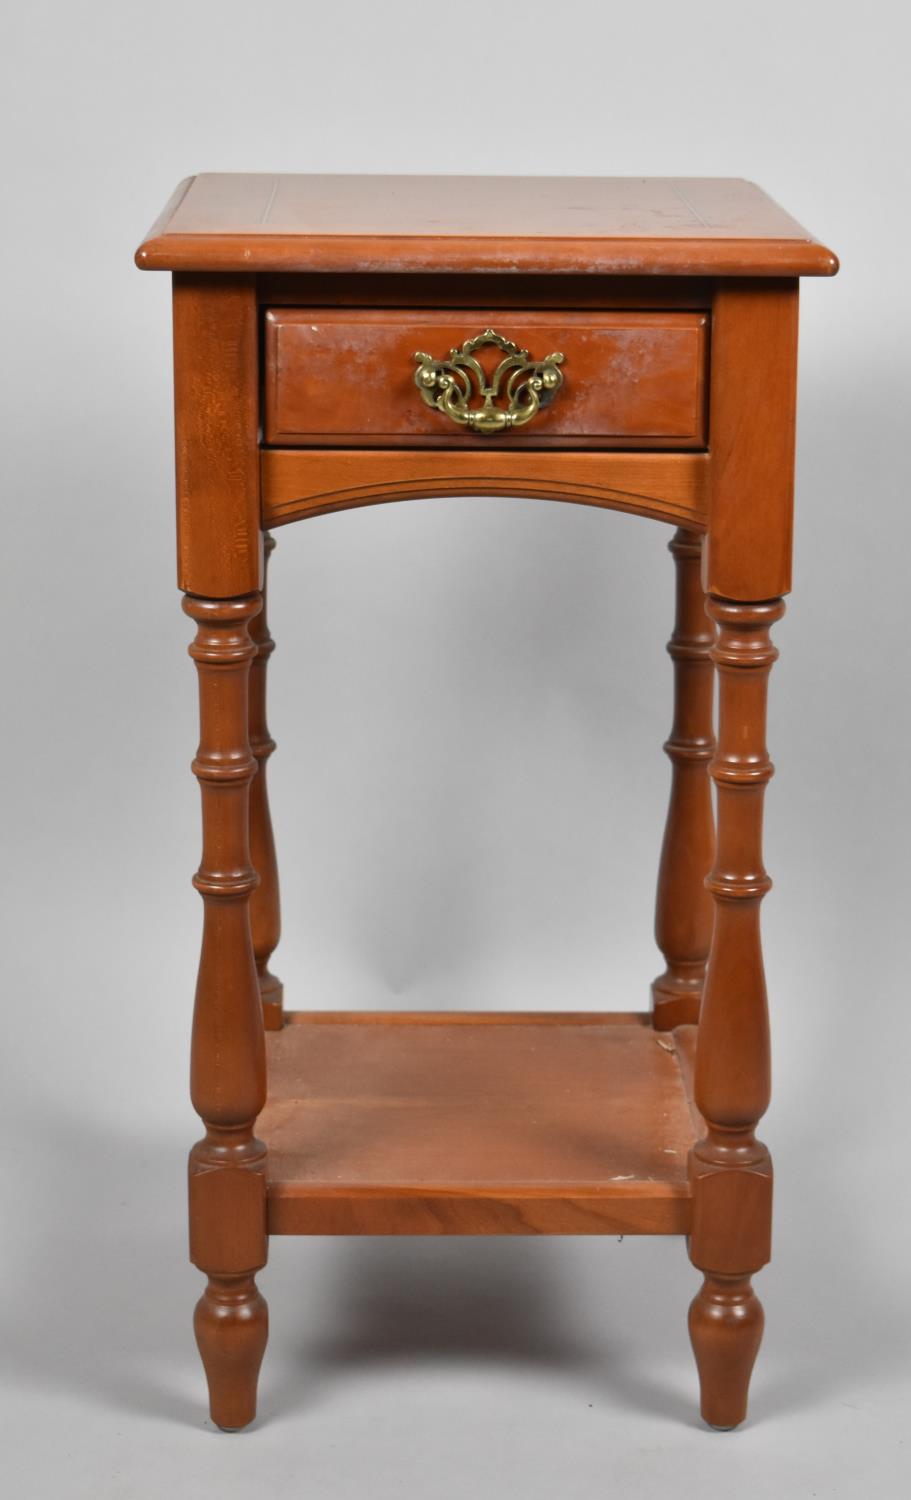 A Modern Square Topped Inlaid Occasional Table in Single Drawer, 36cm